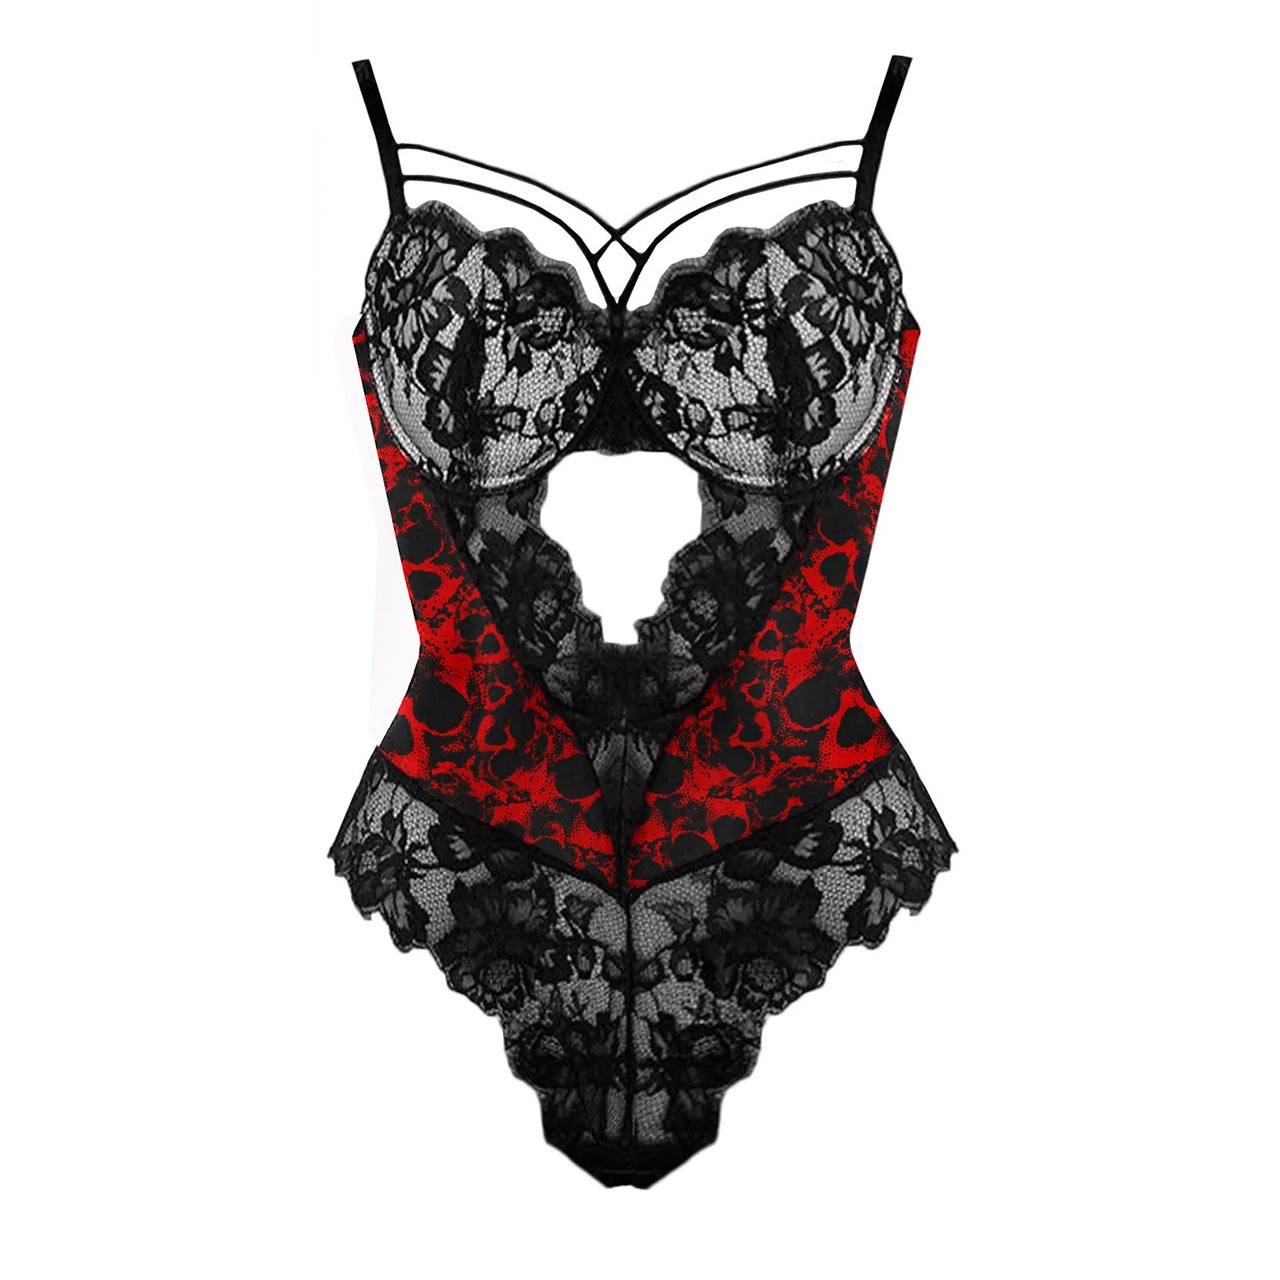 Chic and Sensual Women's Bodysuit with Red Skull Motif – Elevate your style with this chic and sensory delight lingerie.